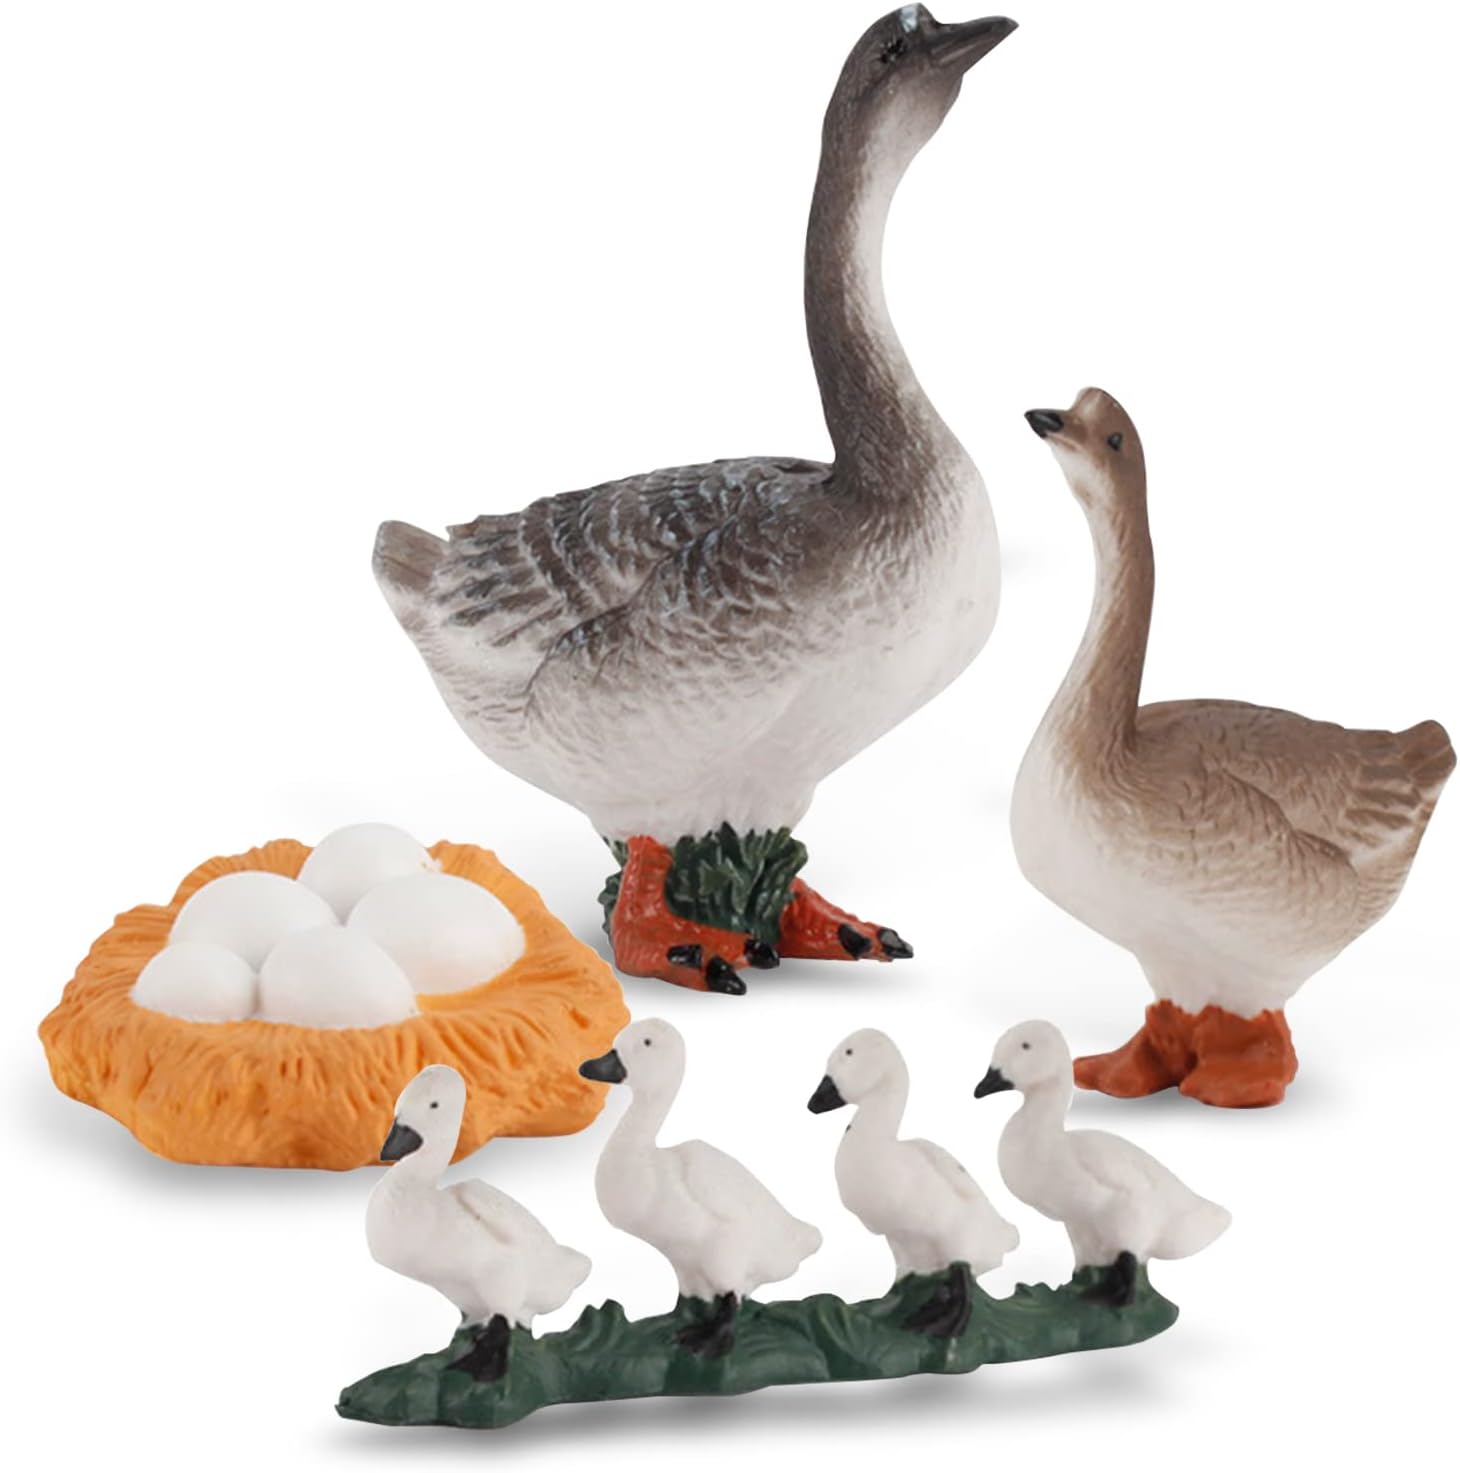 Buy Cycle of Goose Toys Realistic Figurines Farm Animals Life Cycle Set  Life Preschool Animals Figures Eduactional Project Diorama Model Toy for  Kids Online at Lowest Price in Ubuy Botswana. B09LYNPXD6